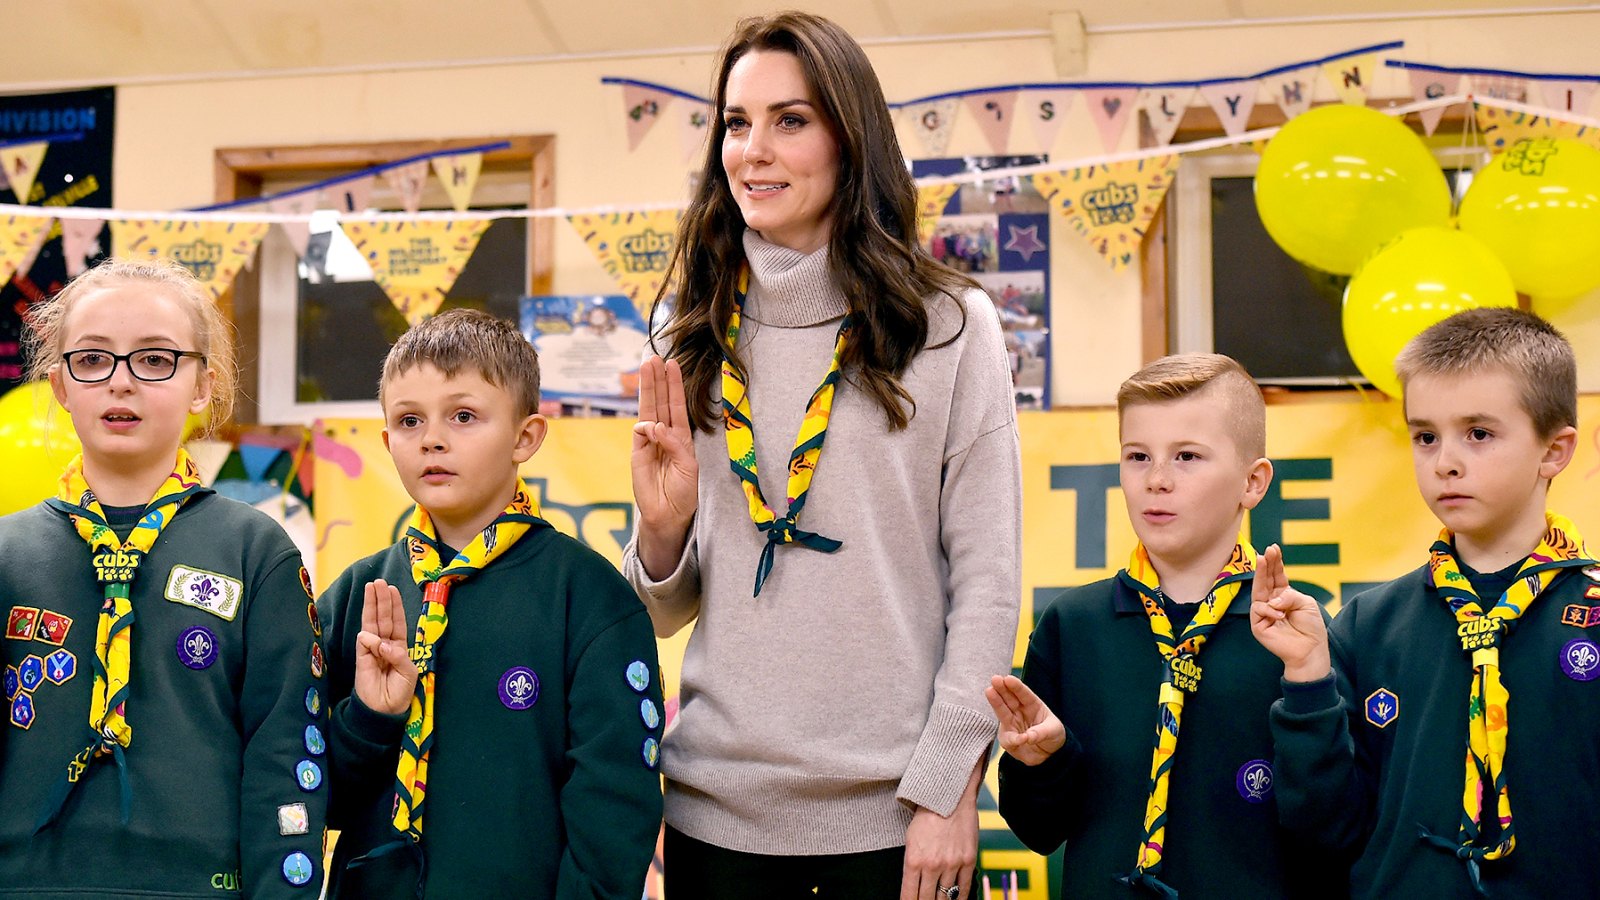 Britain's Catherine, Duchess of Cambridge (C), reads the Scouts promise during a Cub Scout Pack meeting with cubs from the Kings Lynn District, in Kings Lynn, eastern England, on December 14, 2016, to celebrate 100 years of Cubs. The Duchess attended a special Cub Scout Pack meeting with Cubs from the Kings Lynn District to celebrate 100 years of Cubs. Cub Scouting was co-founded by Robert Baden-Powell and Vera Barclay on the 16th December 1916.